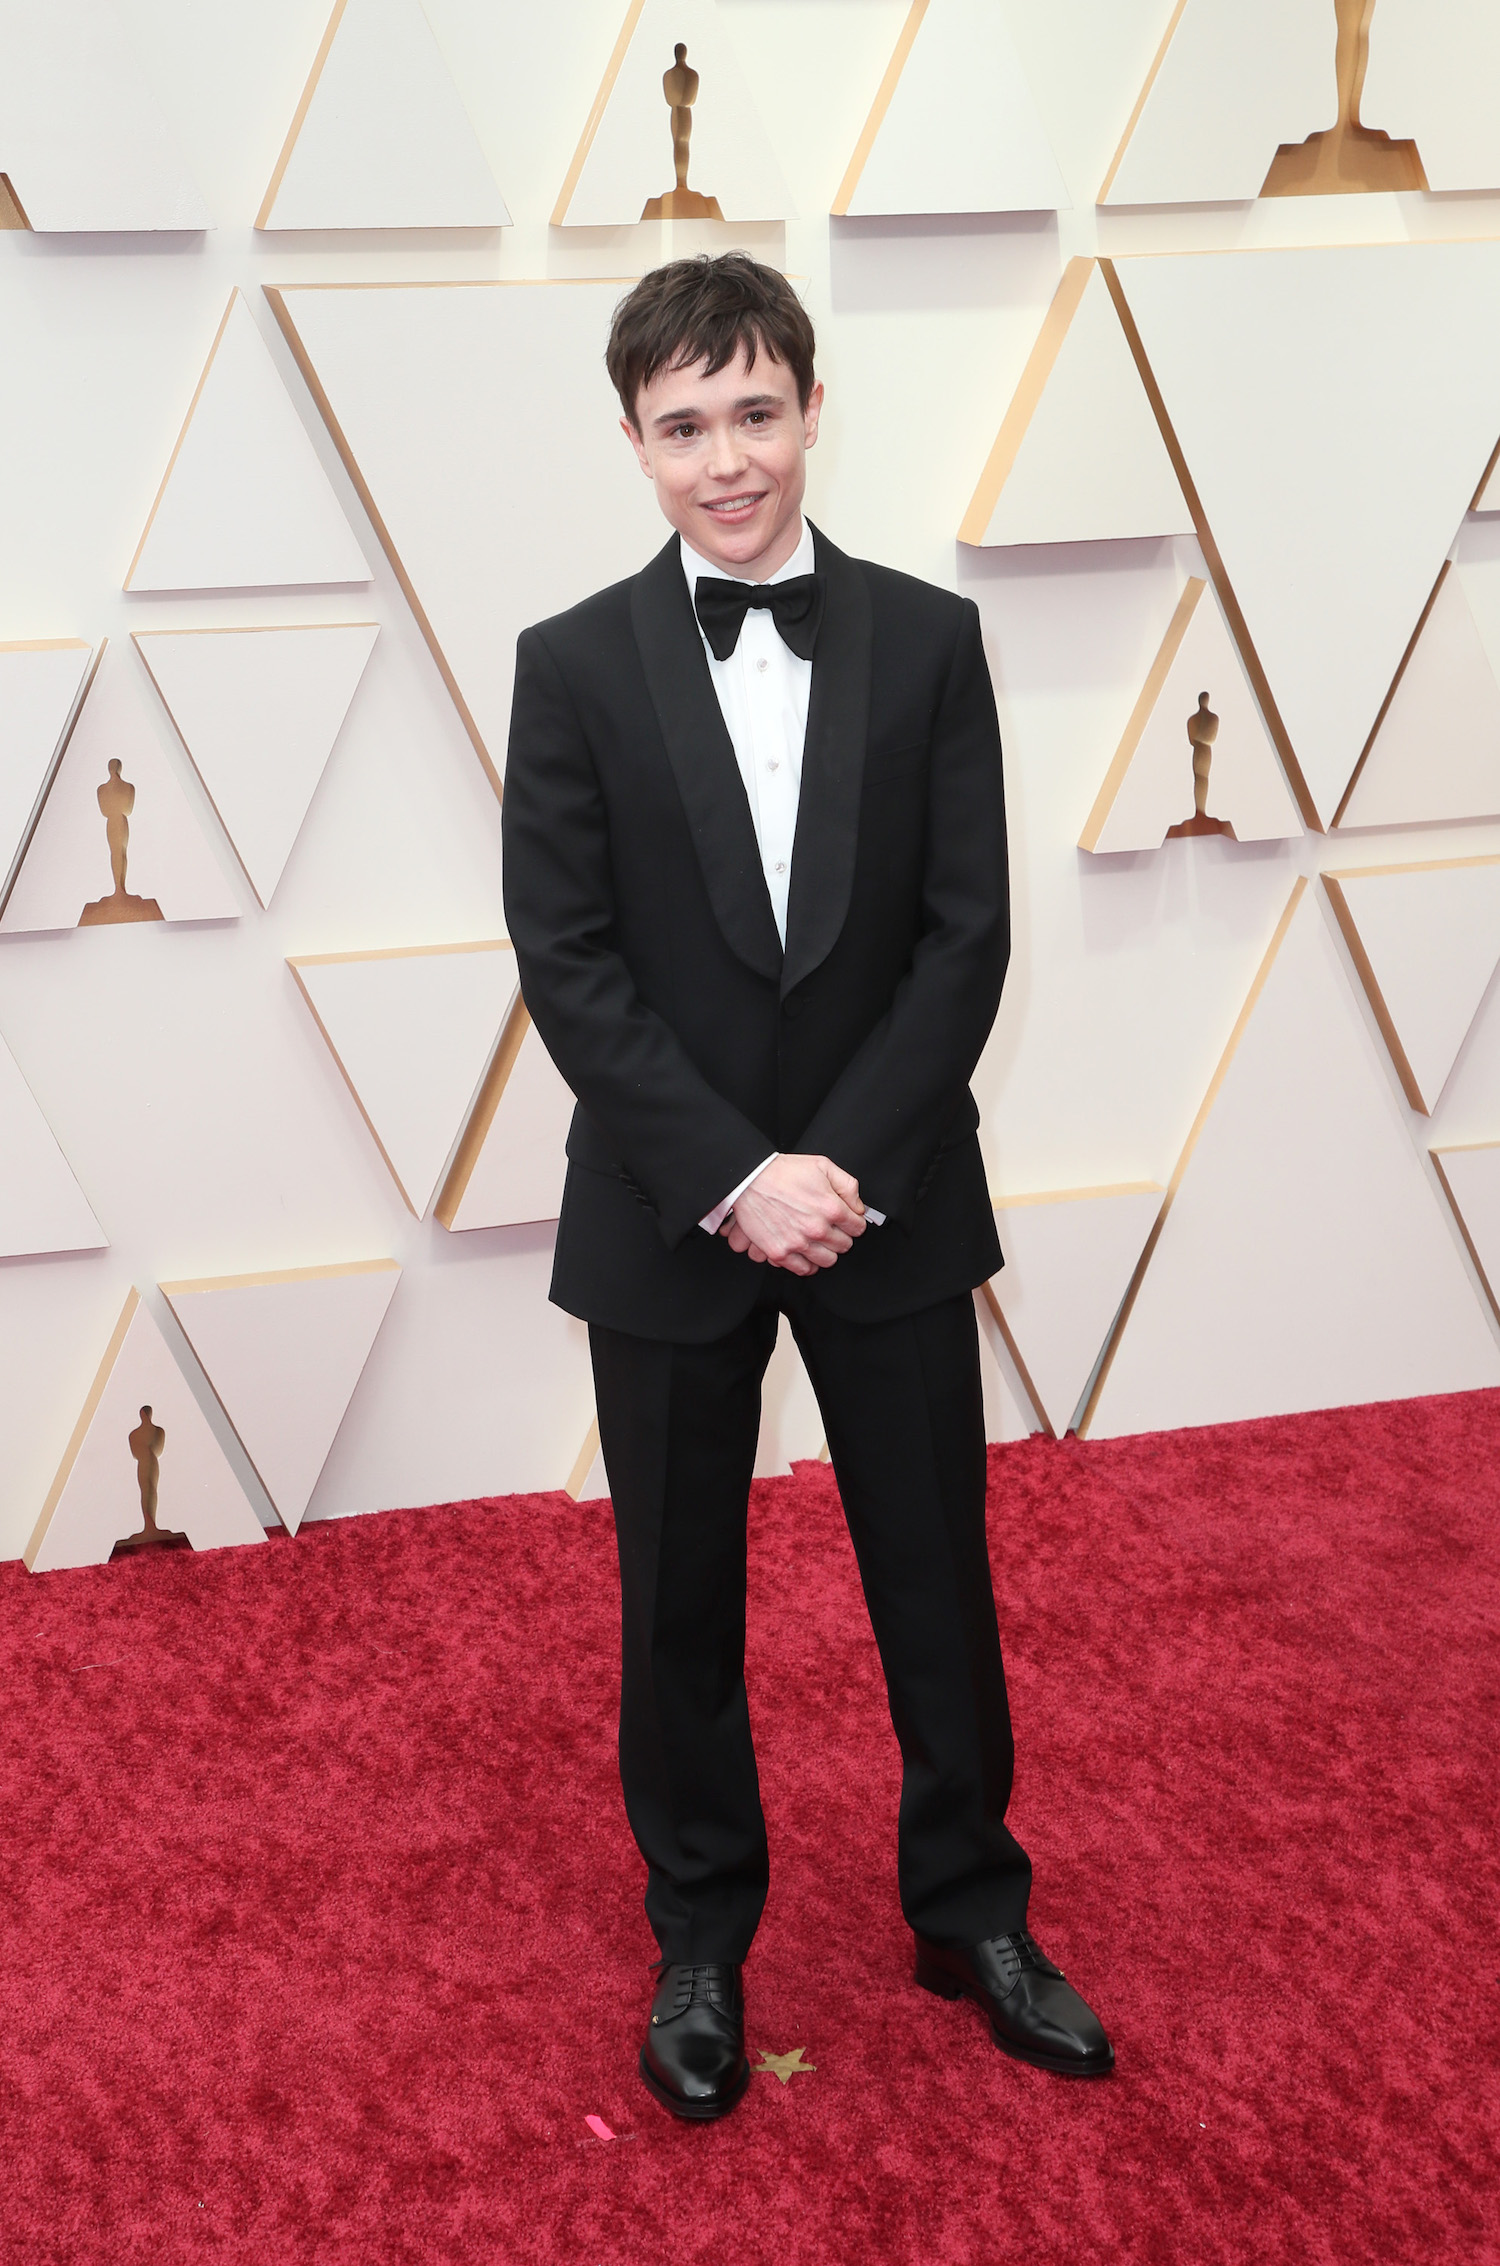 Elliot Page at the Oscars 2022